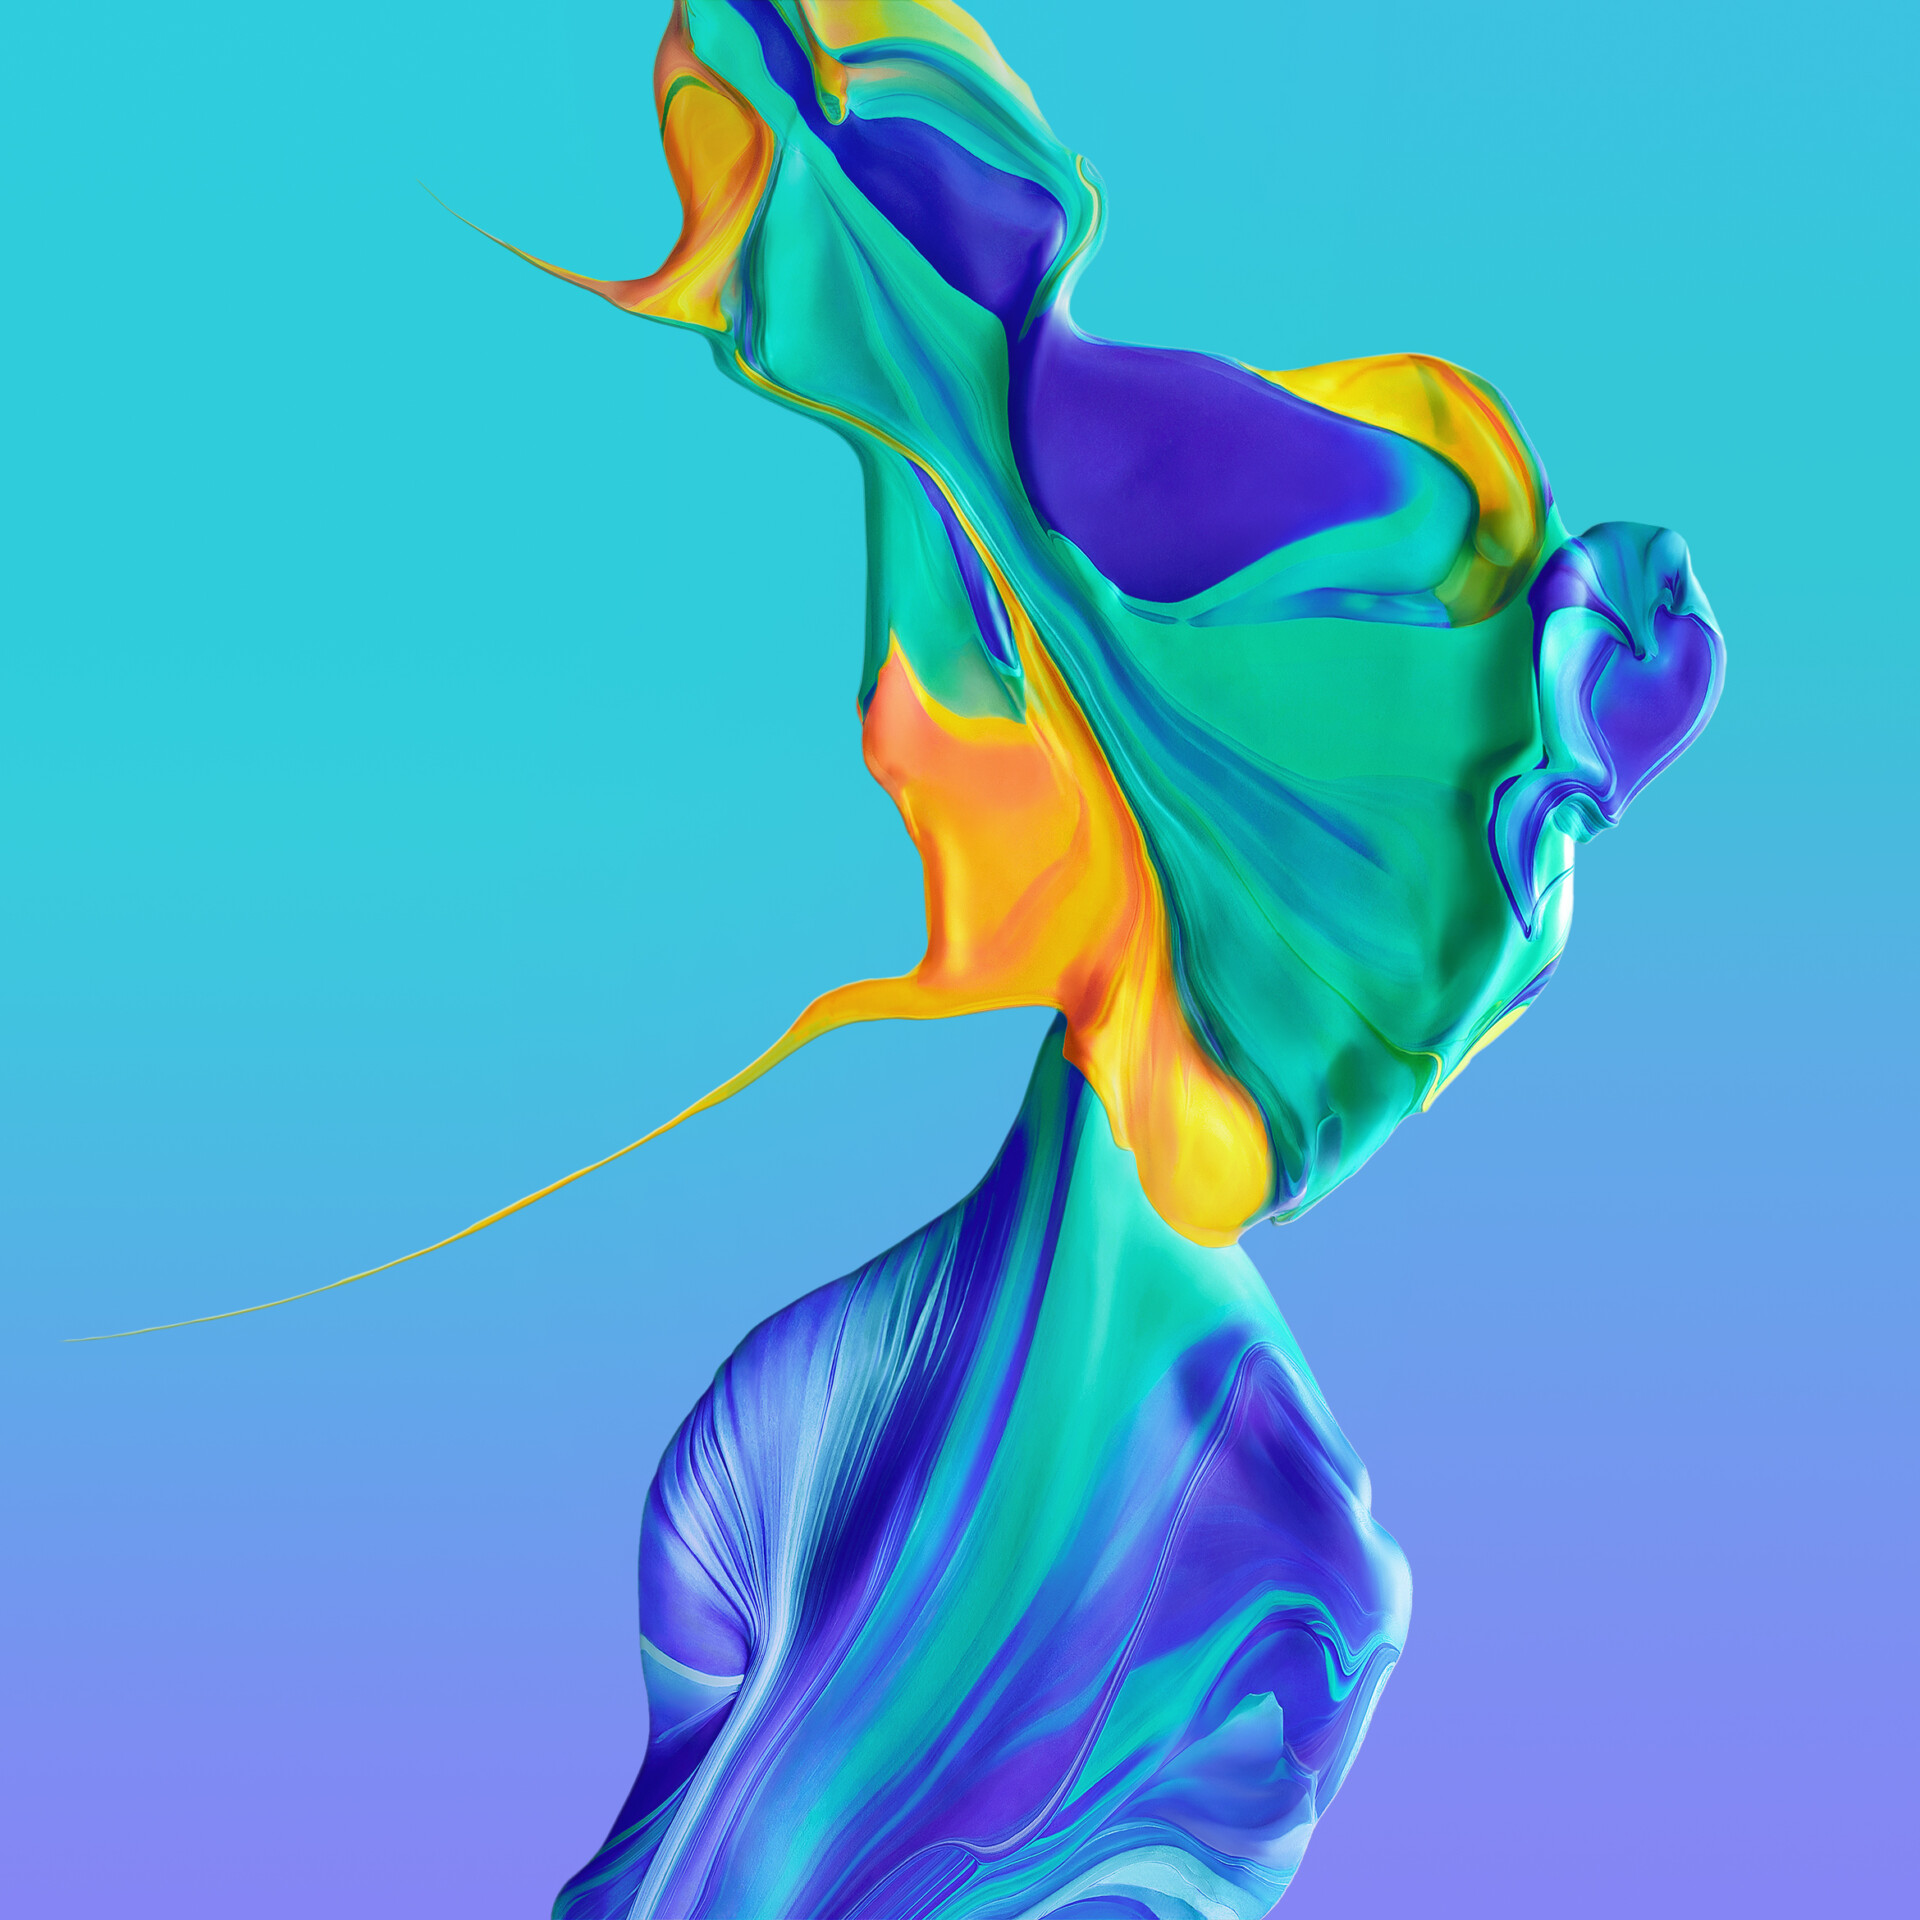 Download Huawei P30 Pro wallpapers here 1920x1920